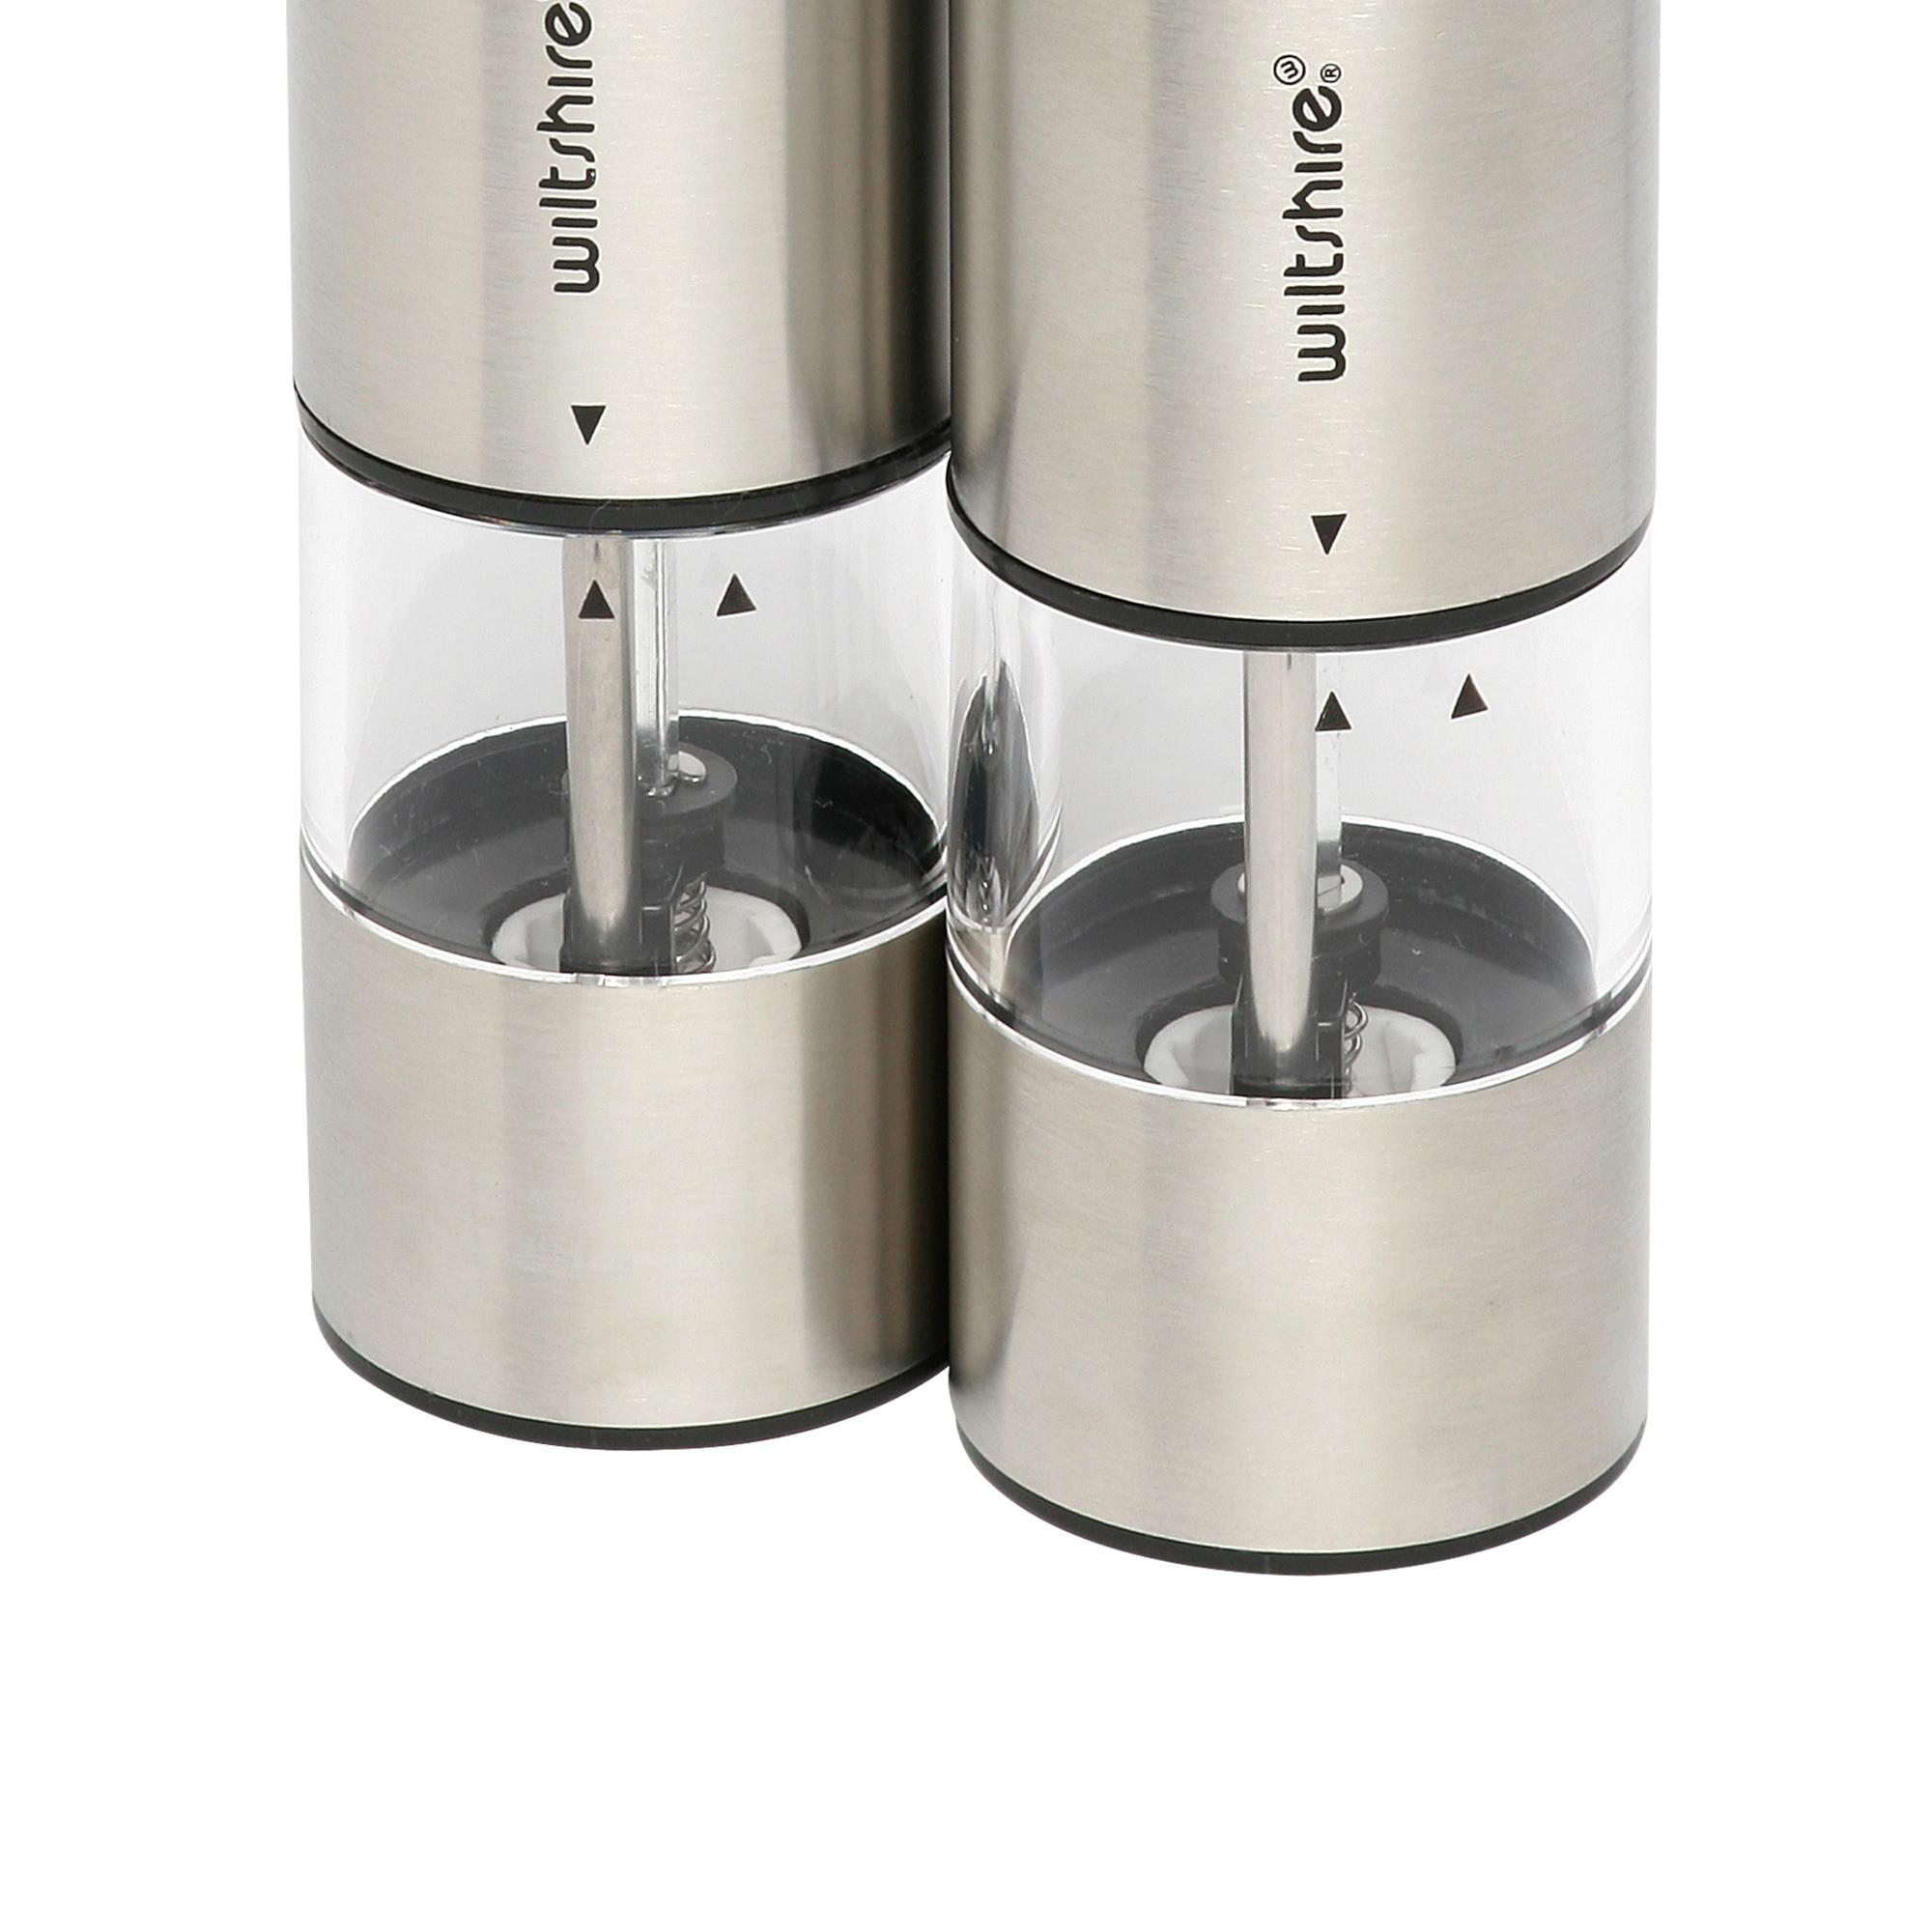 Wiltshire Electric Mill Set Stainless Steel Image 2